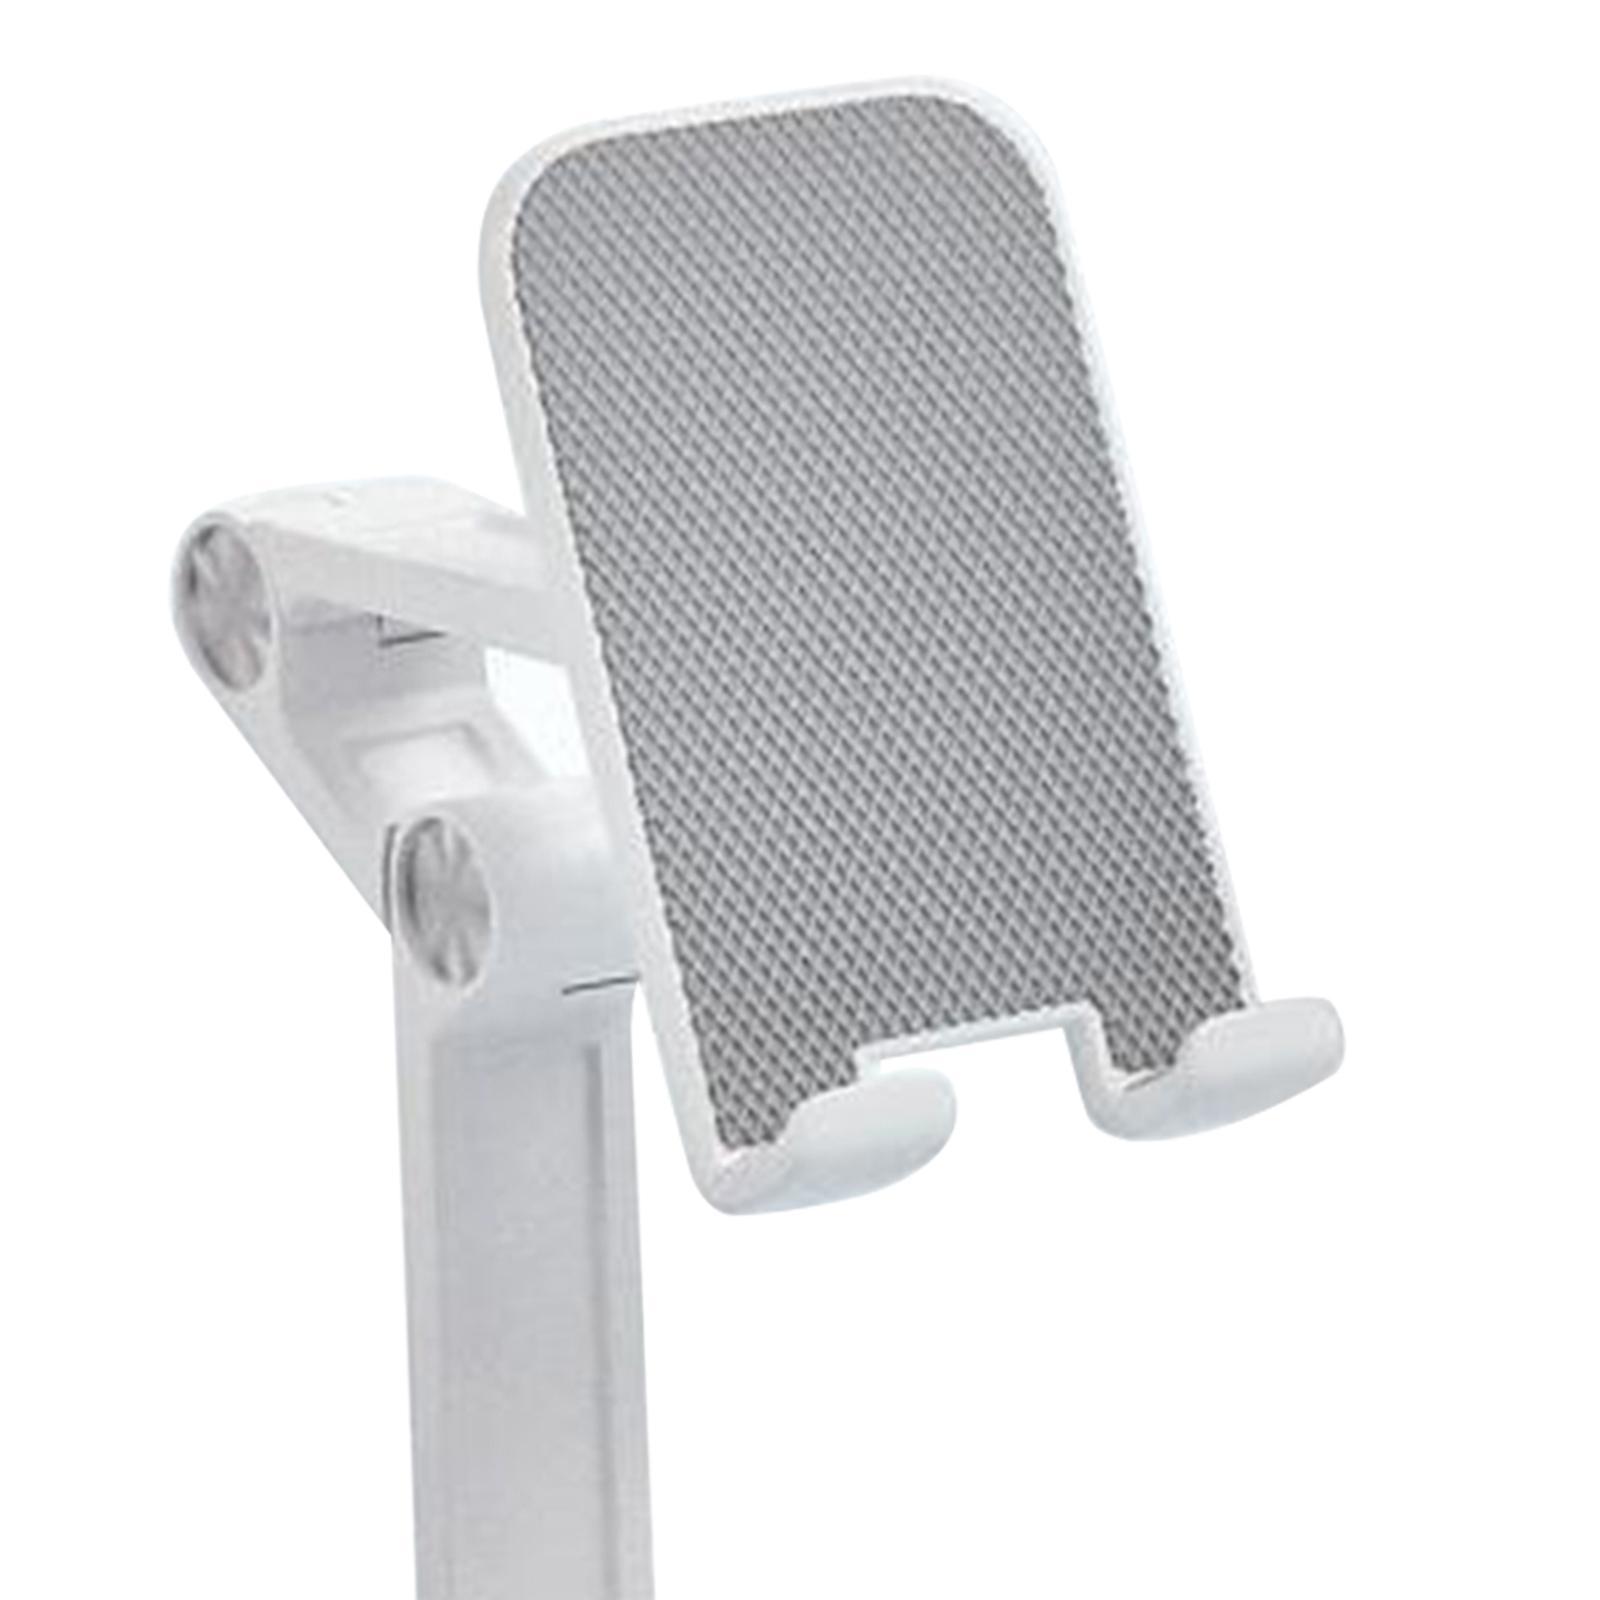 Portable Mobile Phone Stand Holder Mount For Phone Tablet up to 12.9"